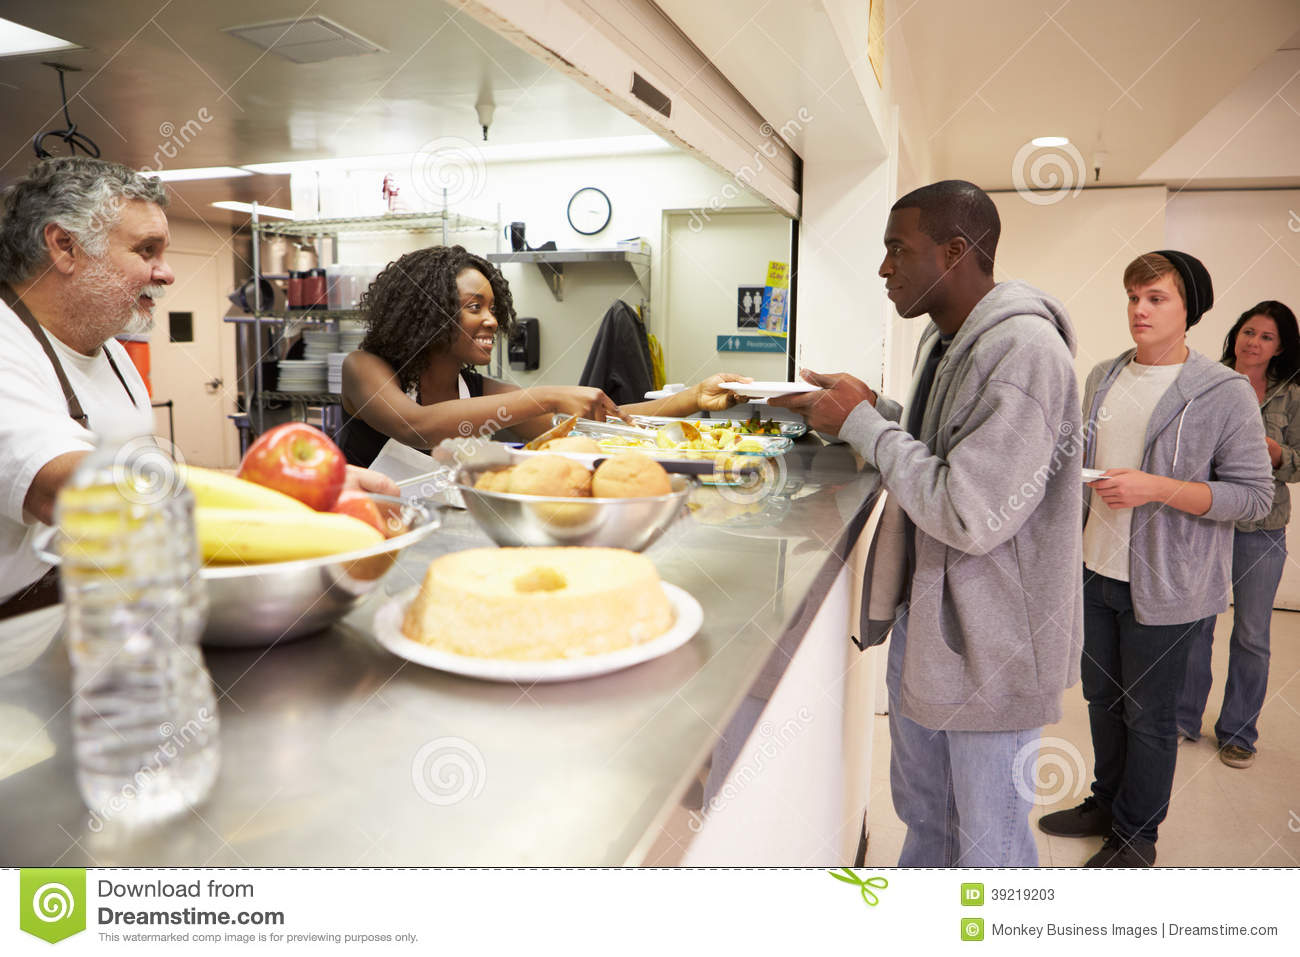 Kitchen Serving Food In Homeless Shelter Stock Photo   Image  39219203